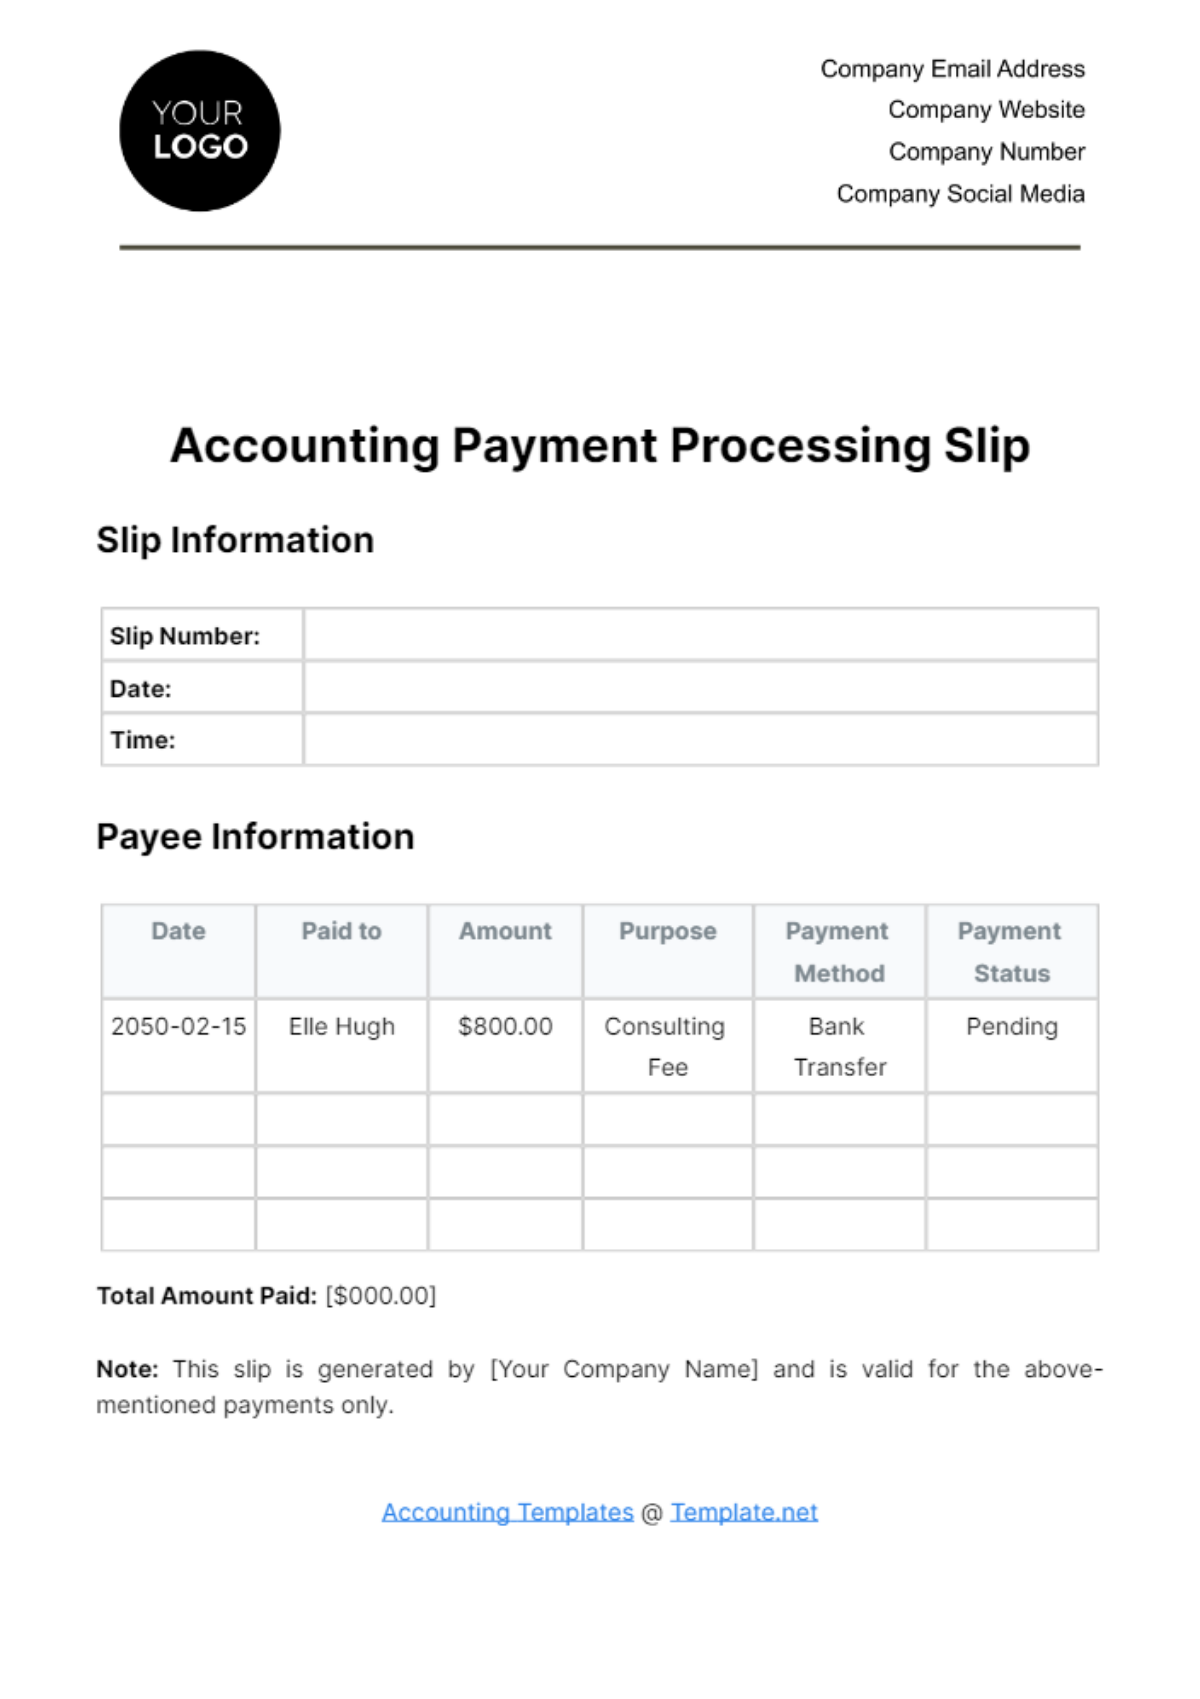 Free Accounting Payment Processing Slip Template